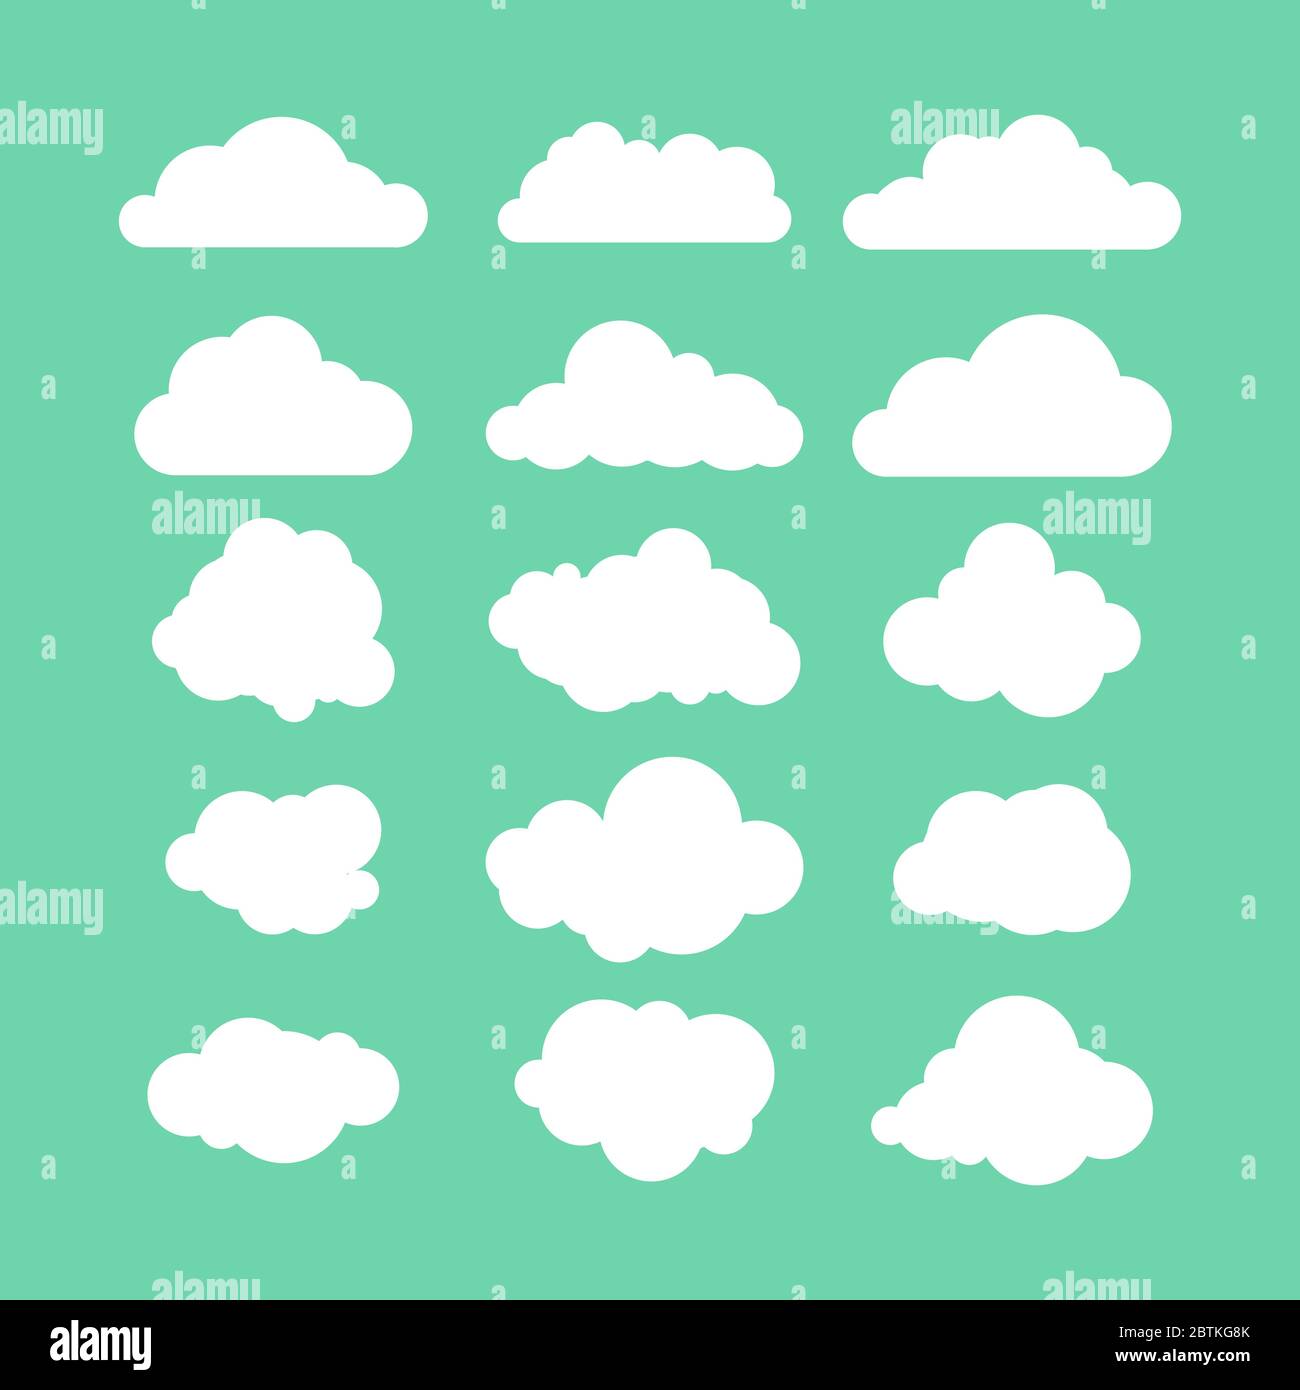 Stock vector illustration set of flat clouds icon Stock Vector